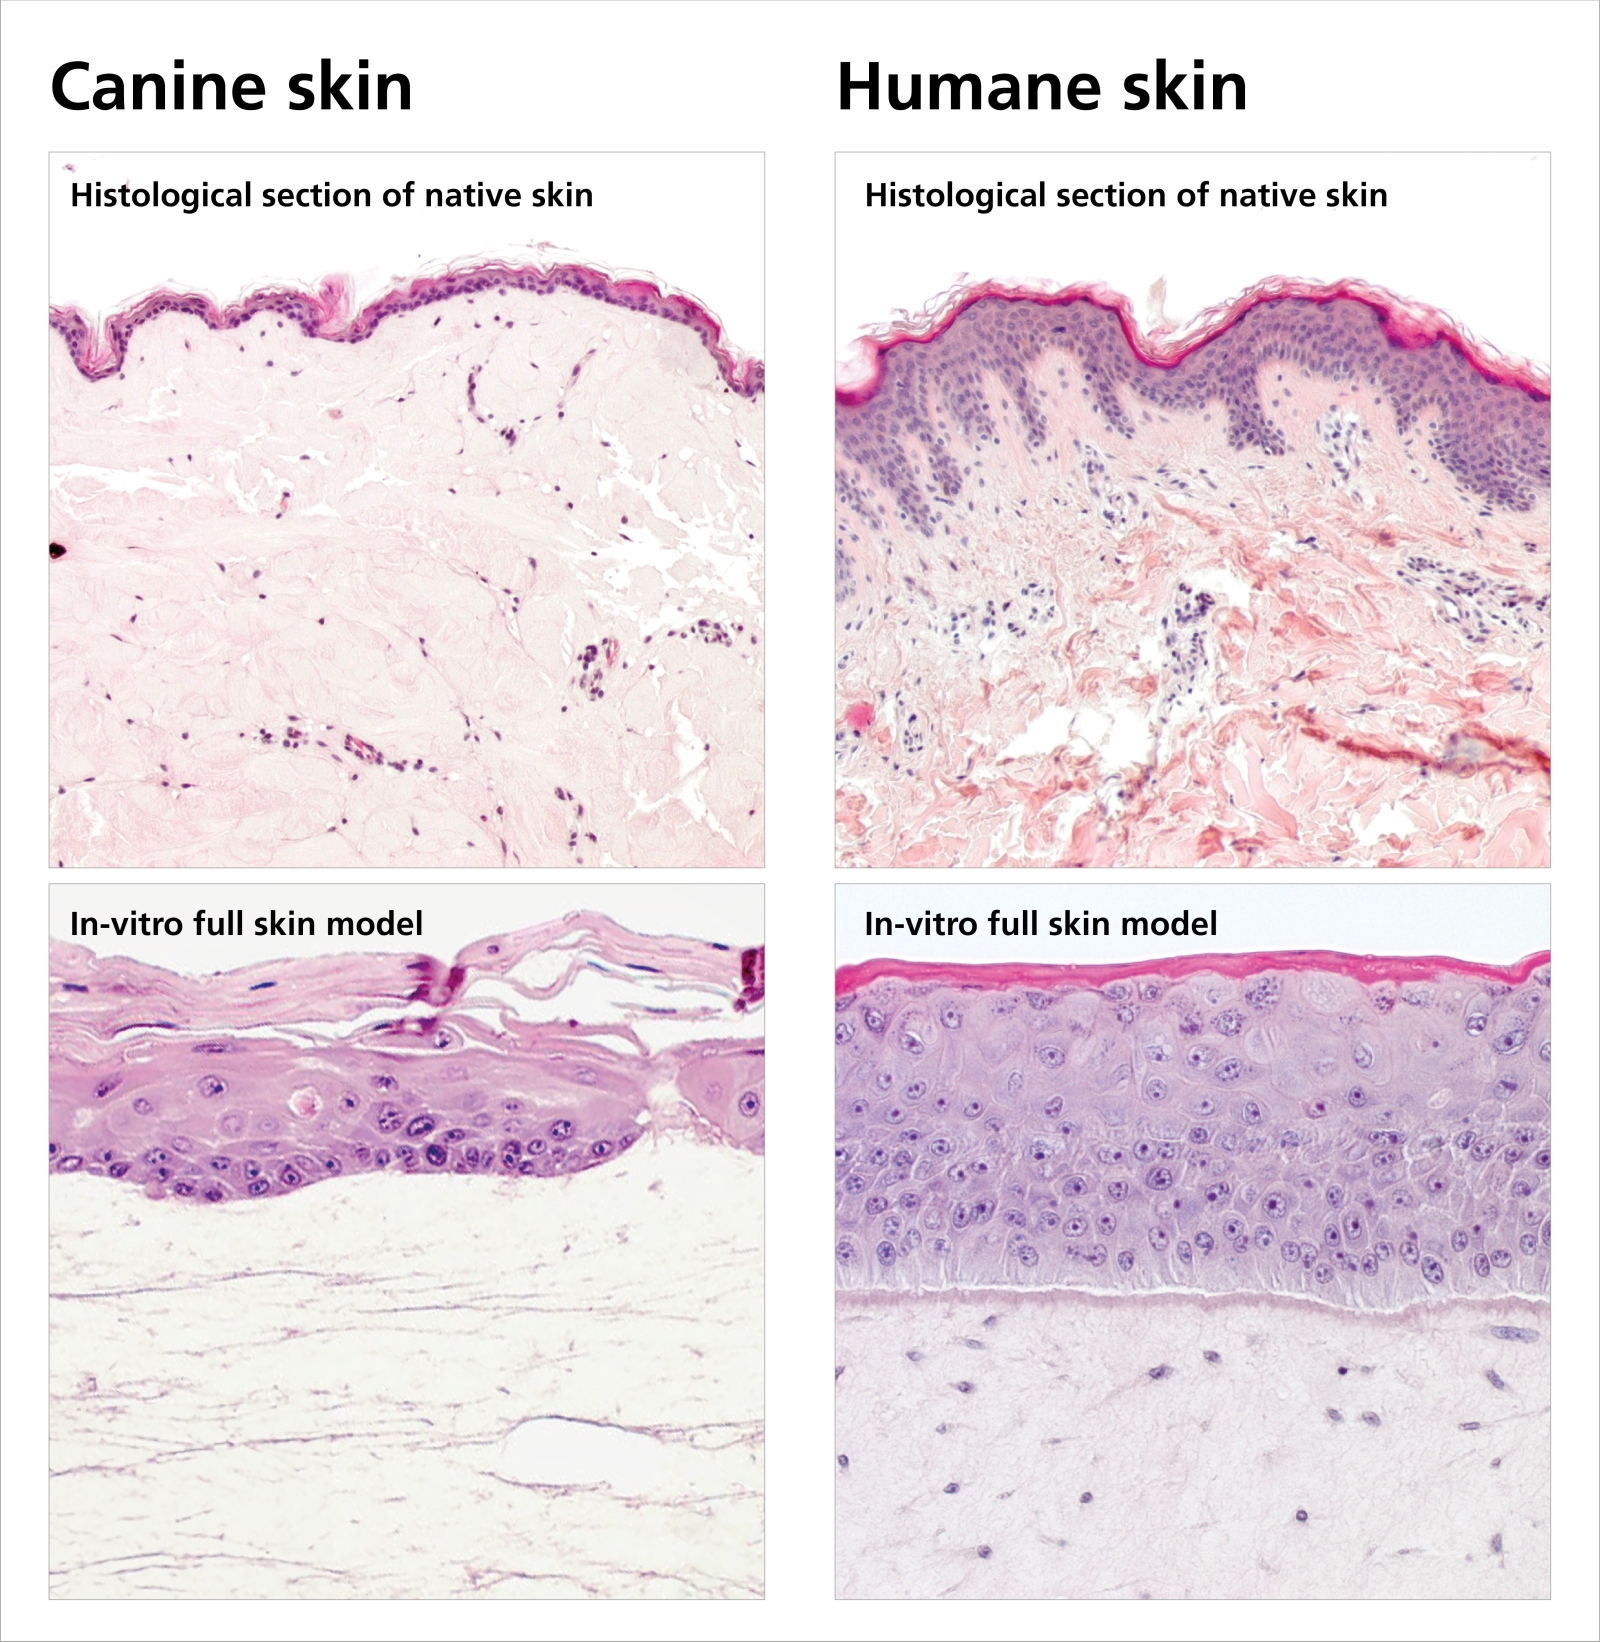 Histological sections of native canine skin (top left) and human skin (top right) show that dogs have a thinner epidermis with hardly any protective function. Microscope images of in-vitro cultivated skin equivalents (bottom) show that lab-grown canine skin (bottom left) is morphologically almost identical to the original.